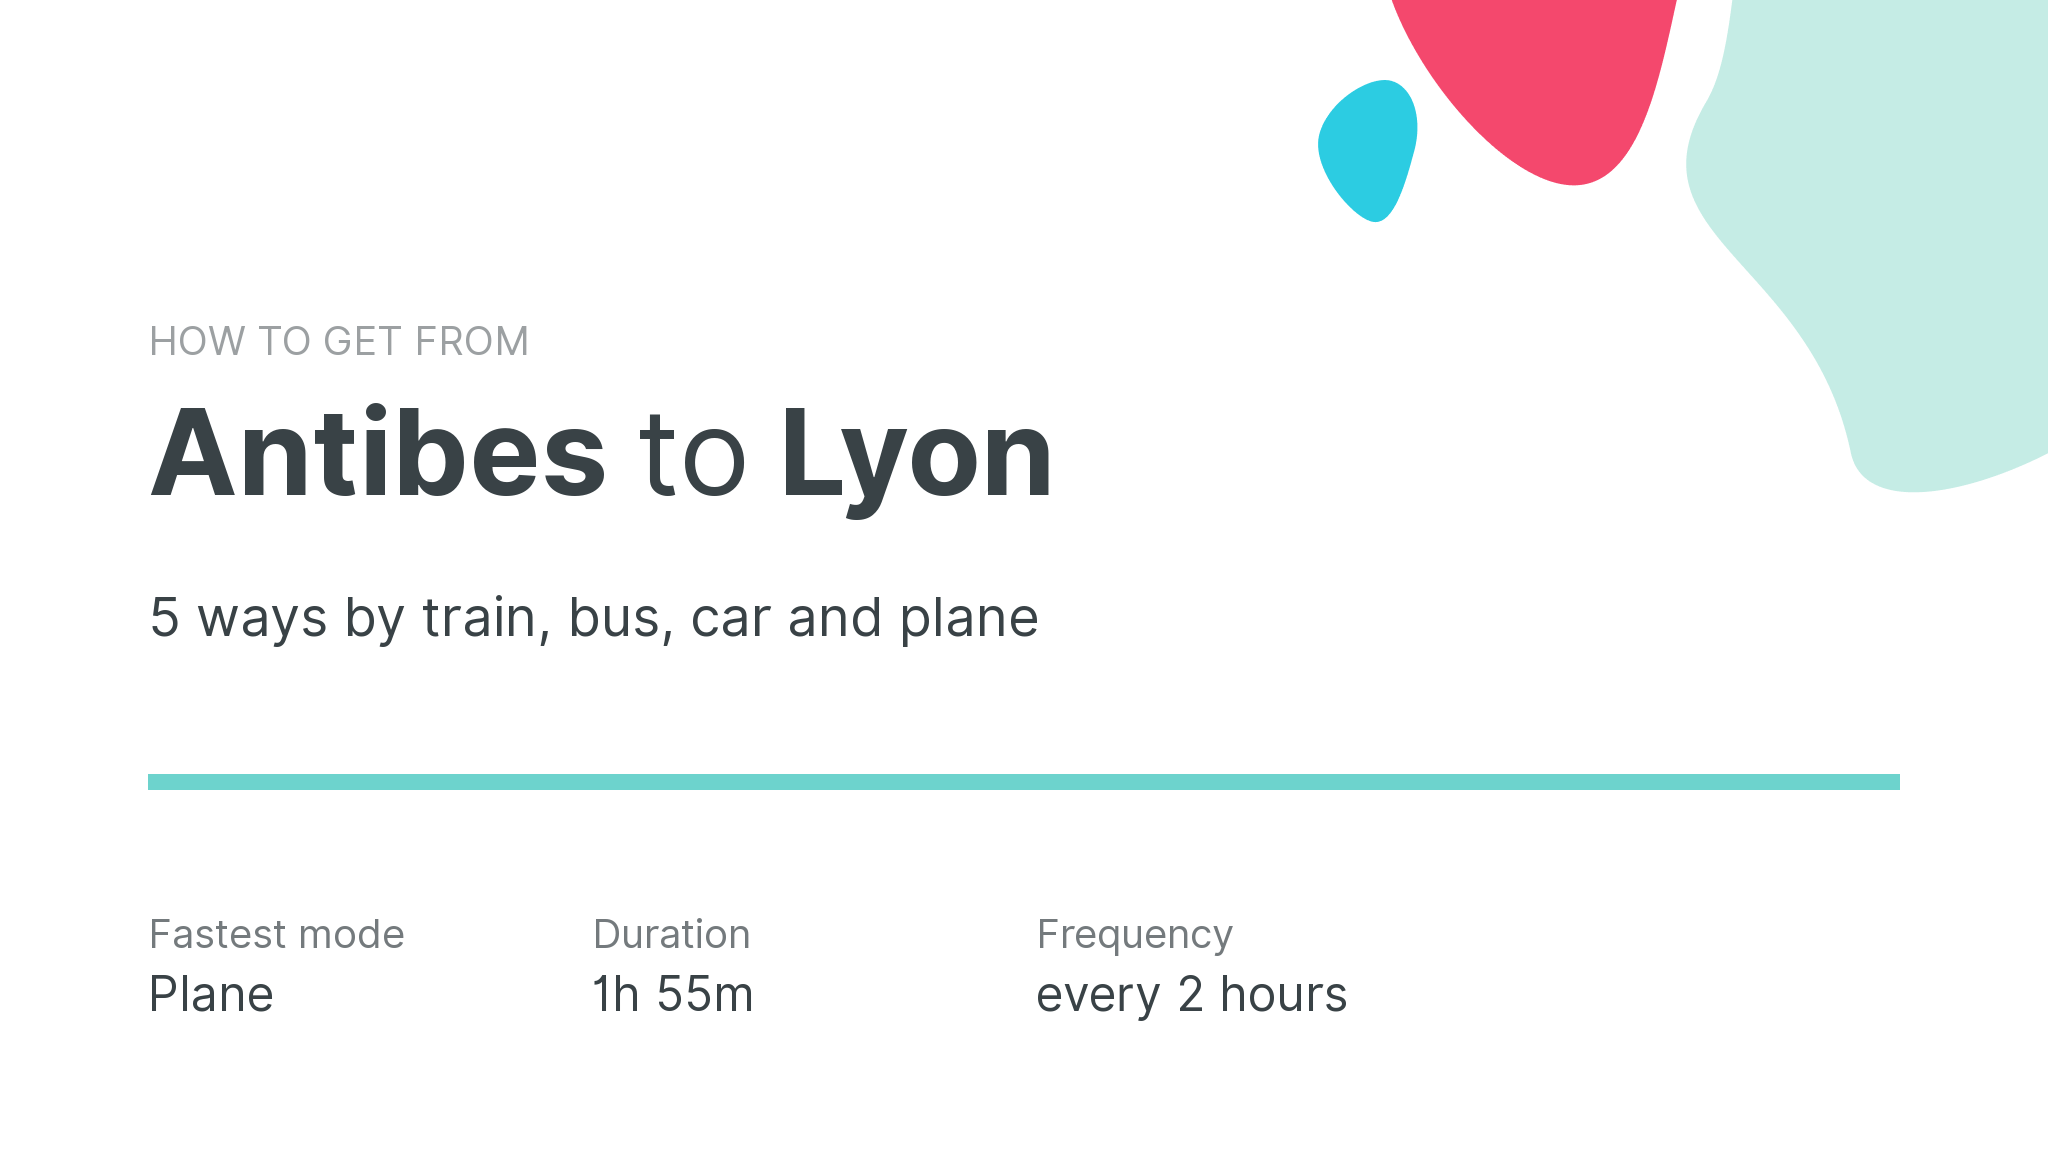 How do I get from Antibes to Lyon